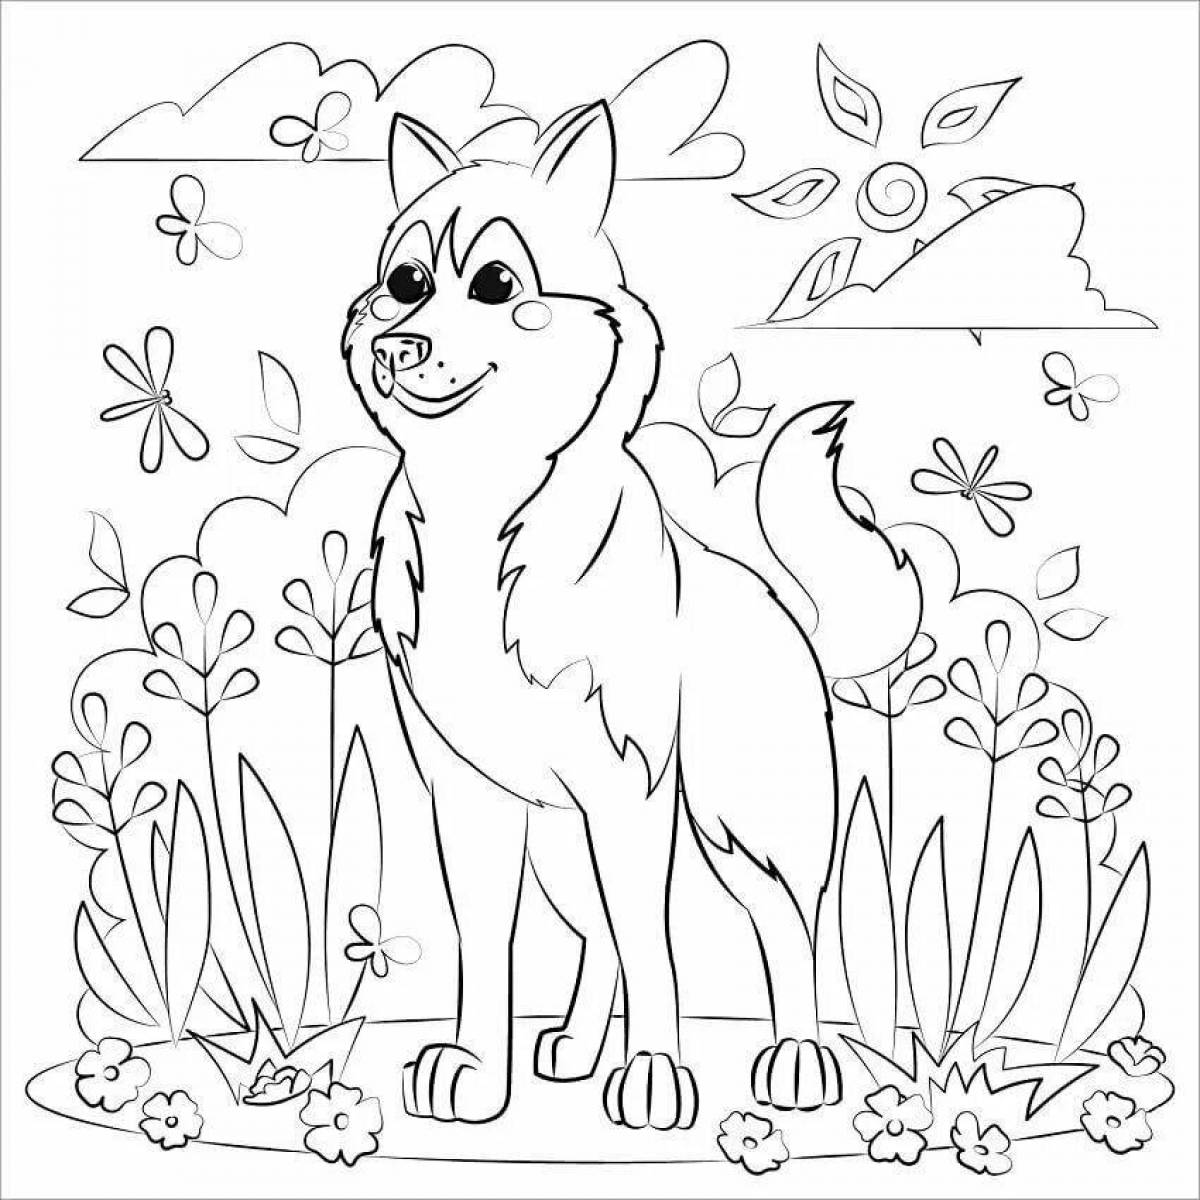 Coloring page funny husky puppy